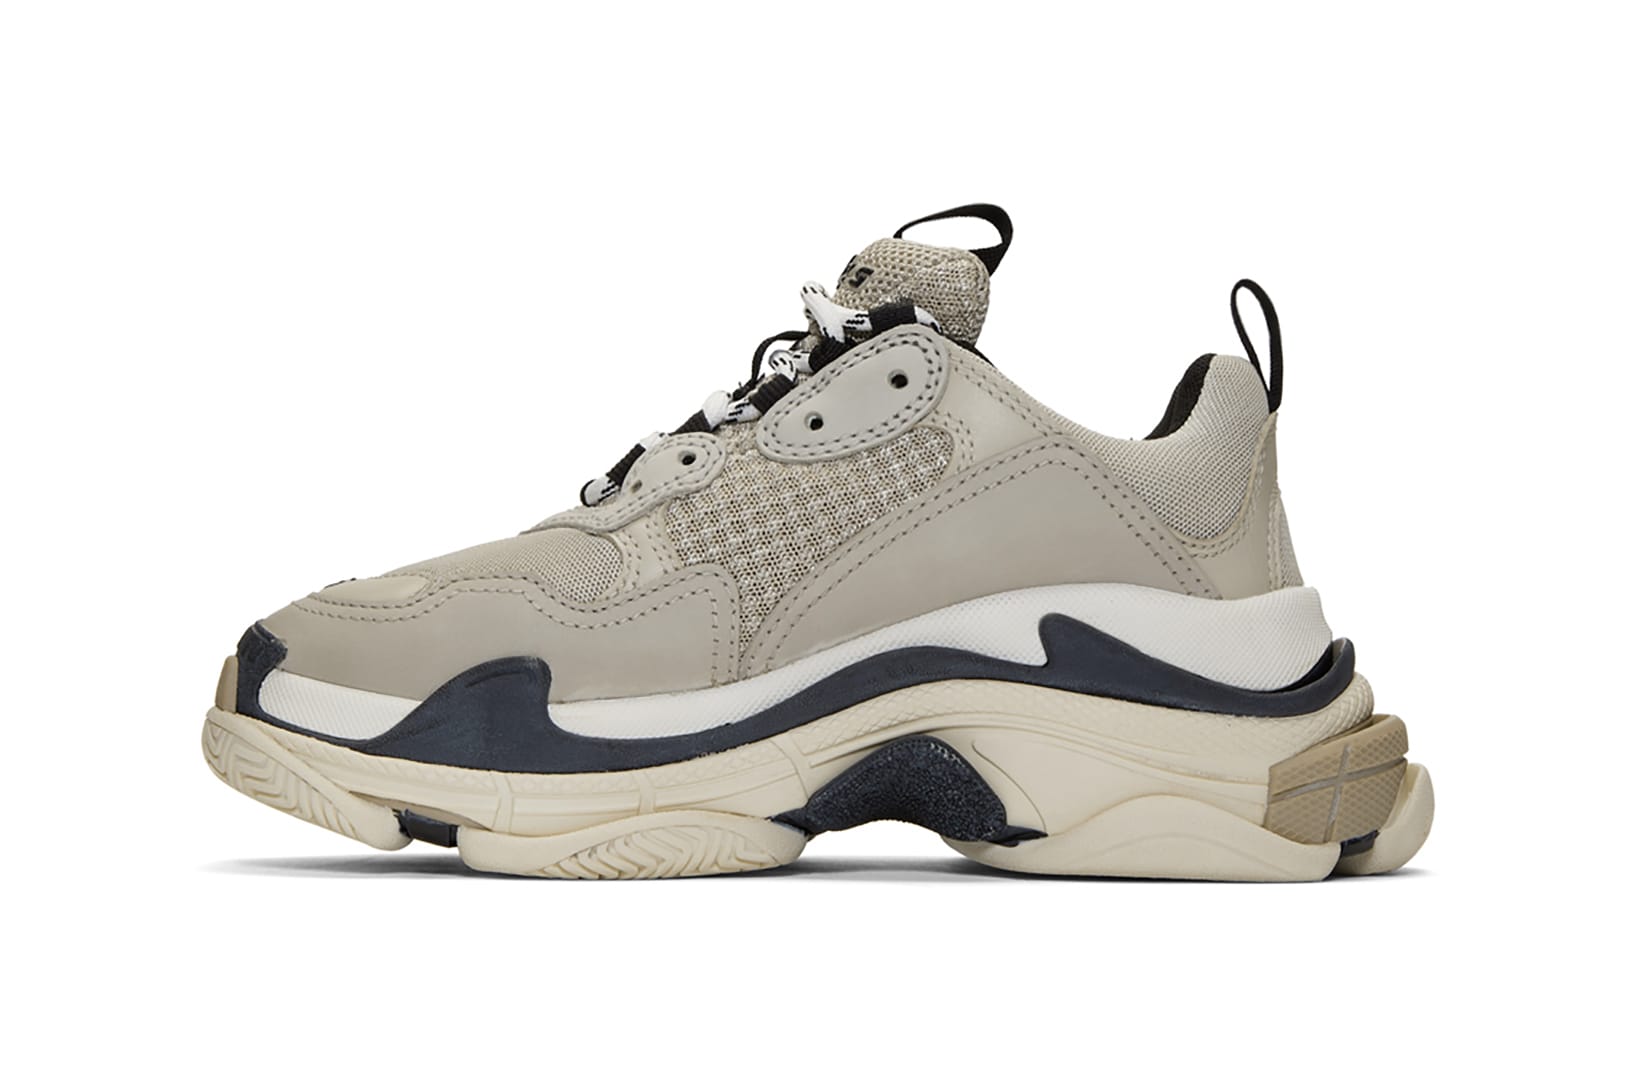 Balenciaga Synthetic Triple S Low Top Trainers in Navy Blue